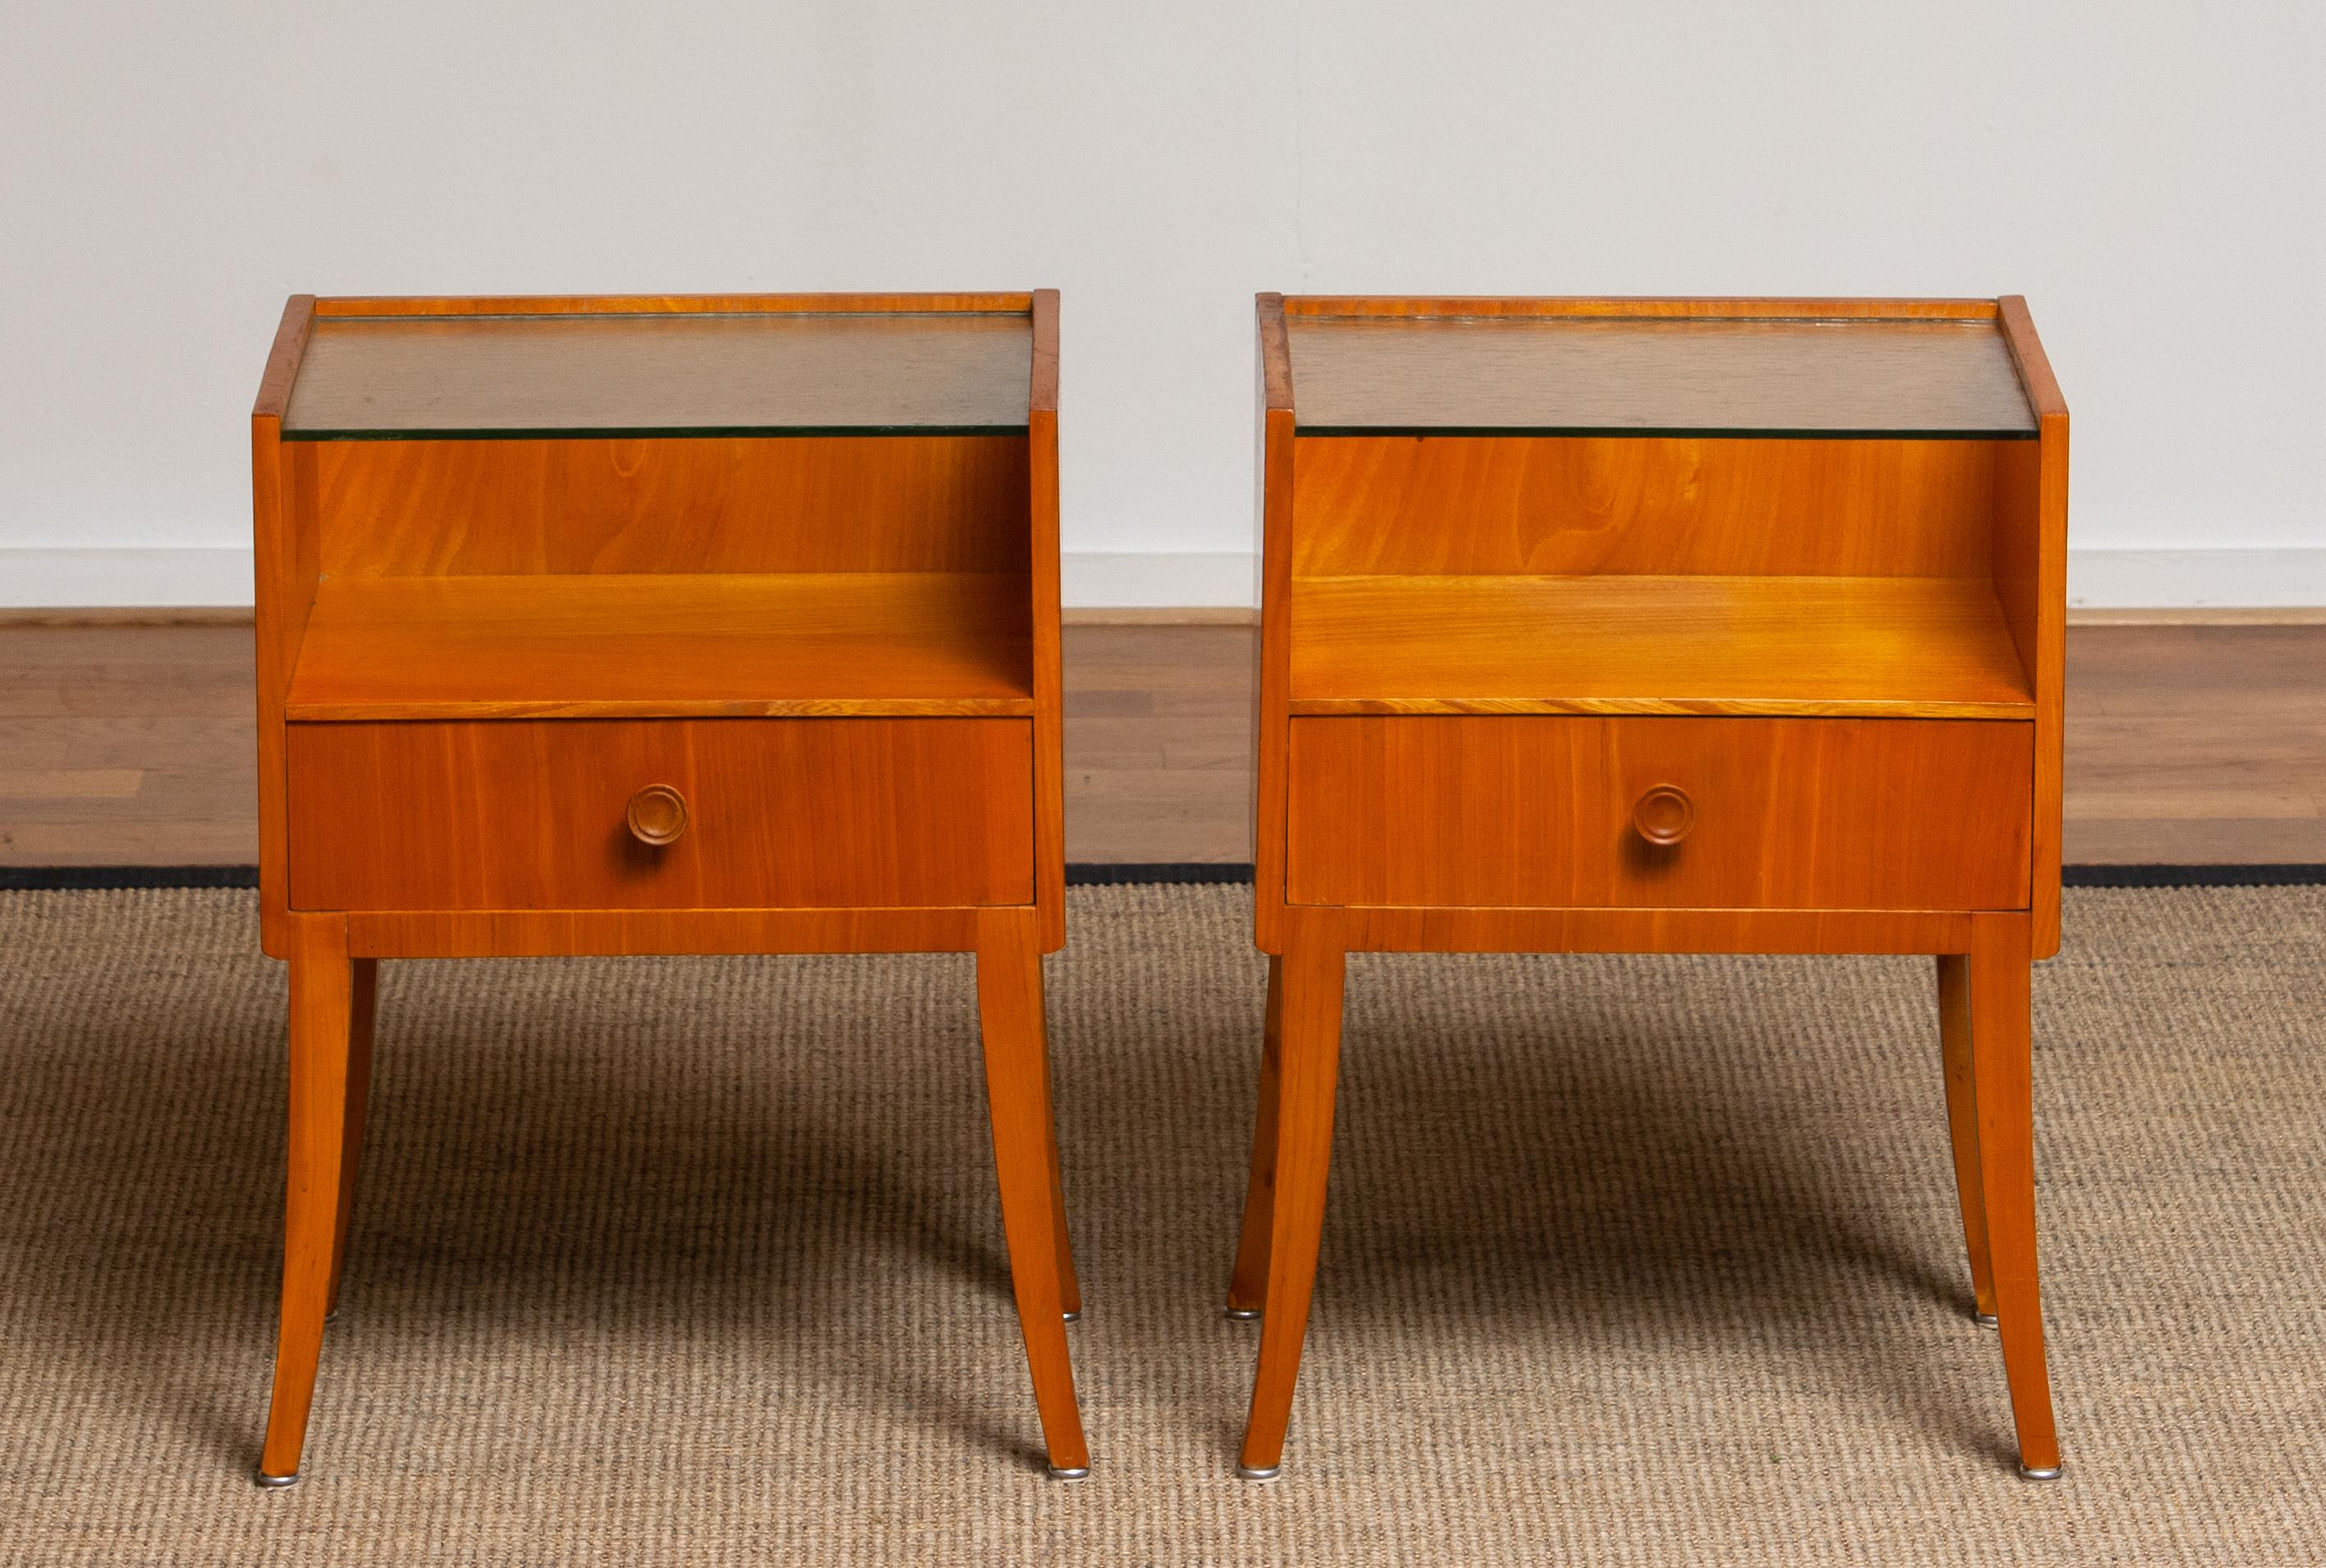 Mid-20th Century 1950s Pair of Nightstands / Bedside Tables from Sweden in Elm with Glass Top